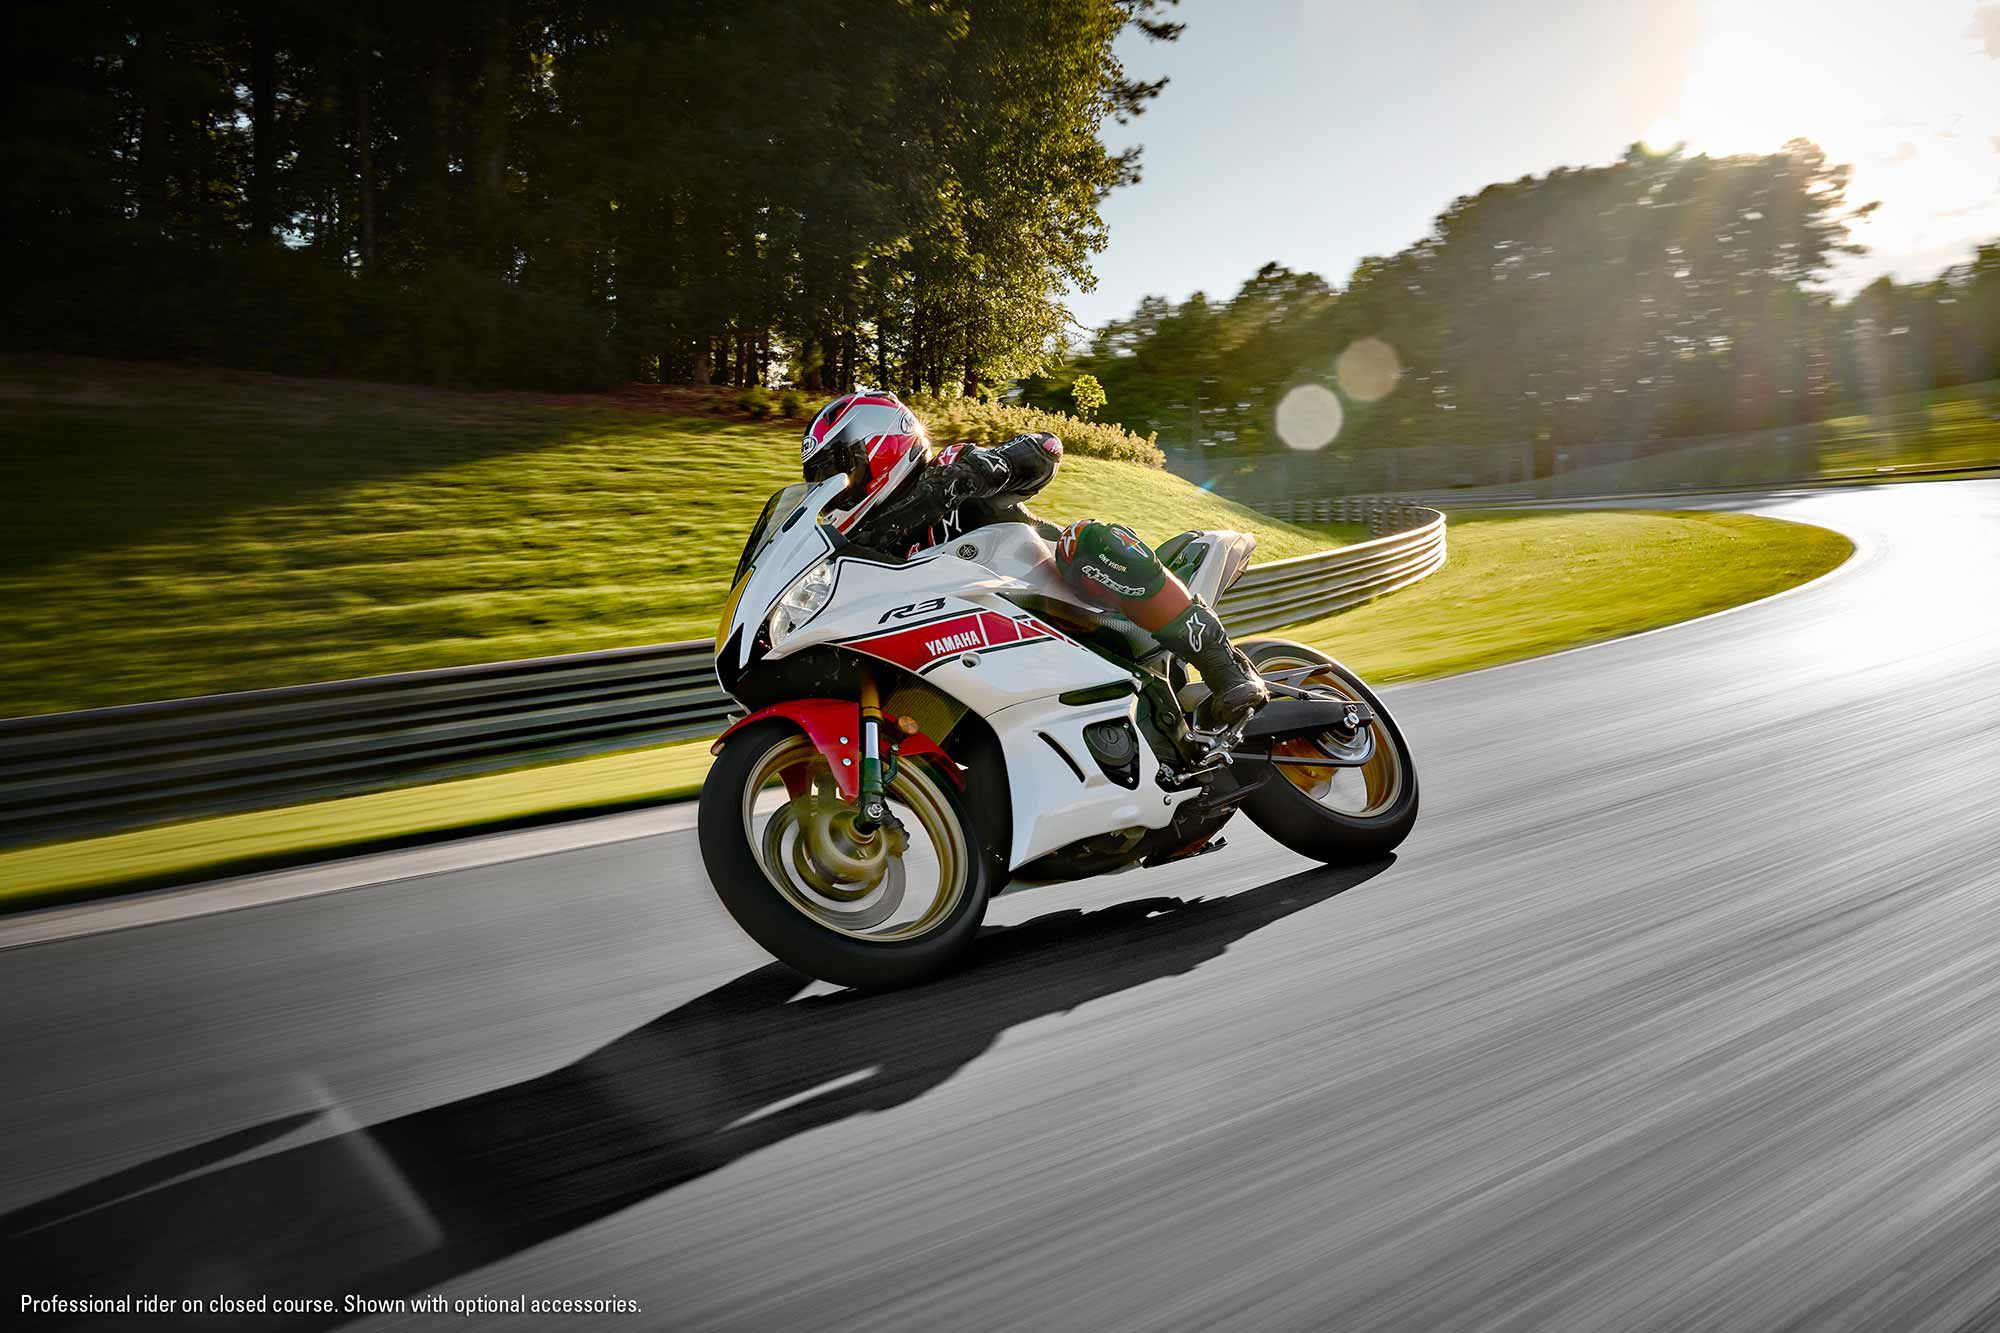 The 2022 YZF-R3 in the white and red block colorway will price at $5,499.